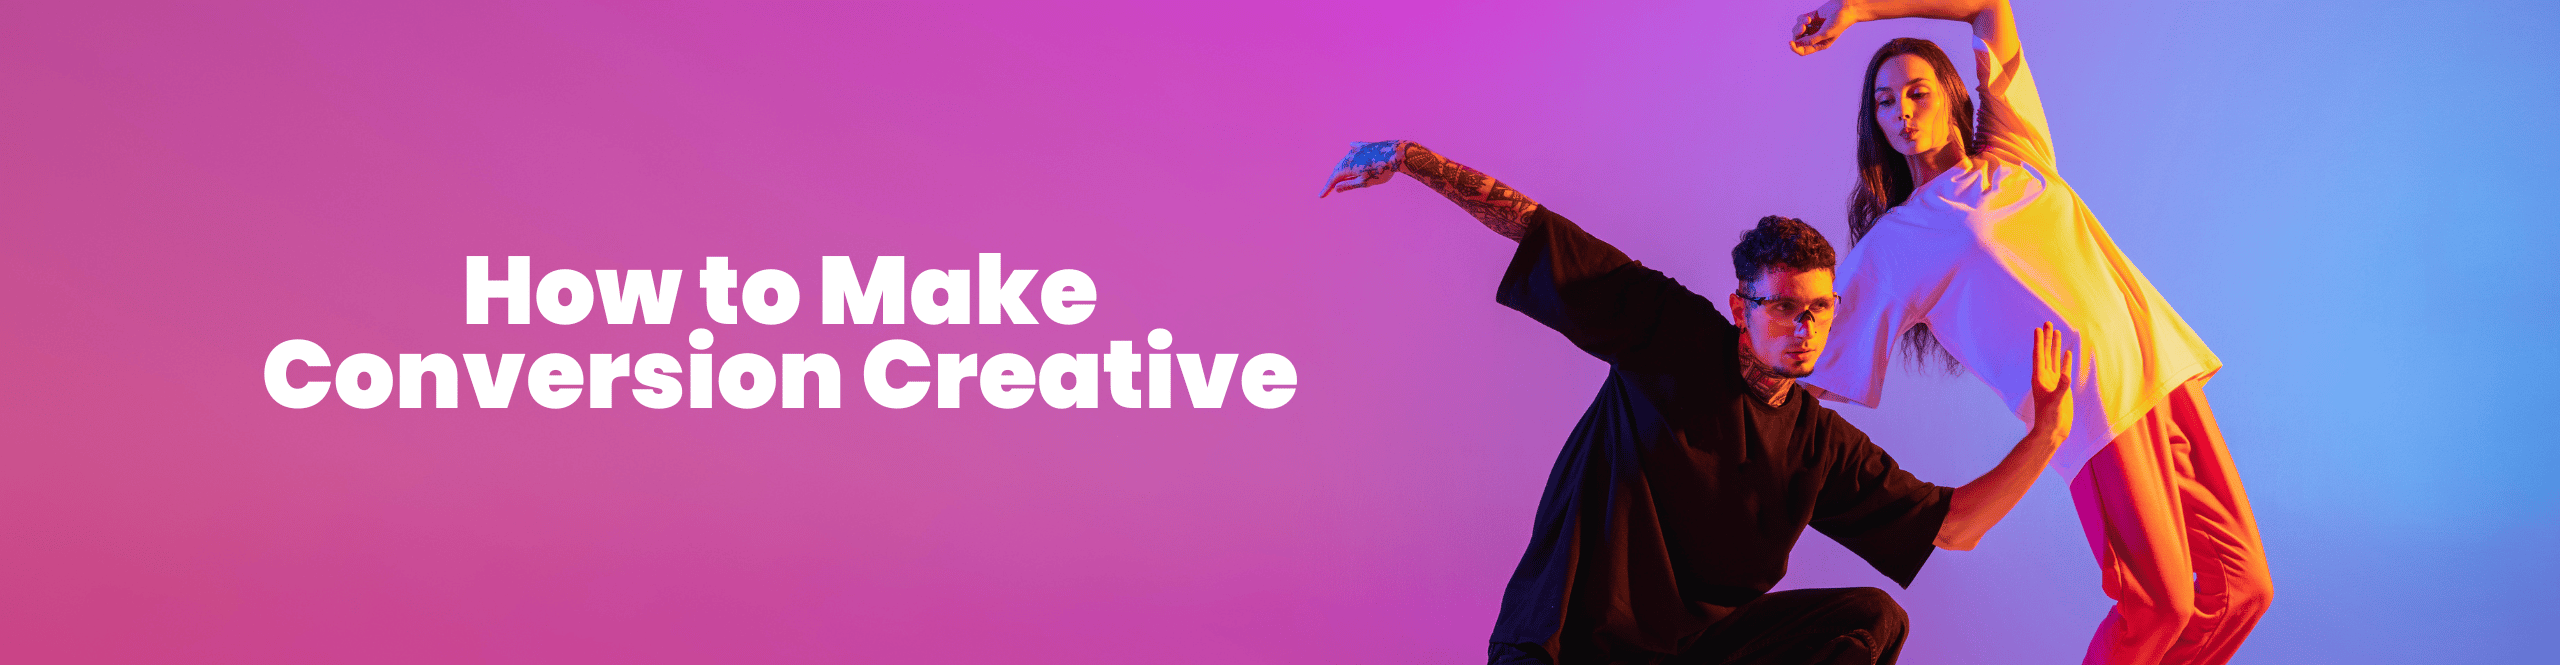 How to Make Conversion Focused Creative